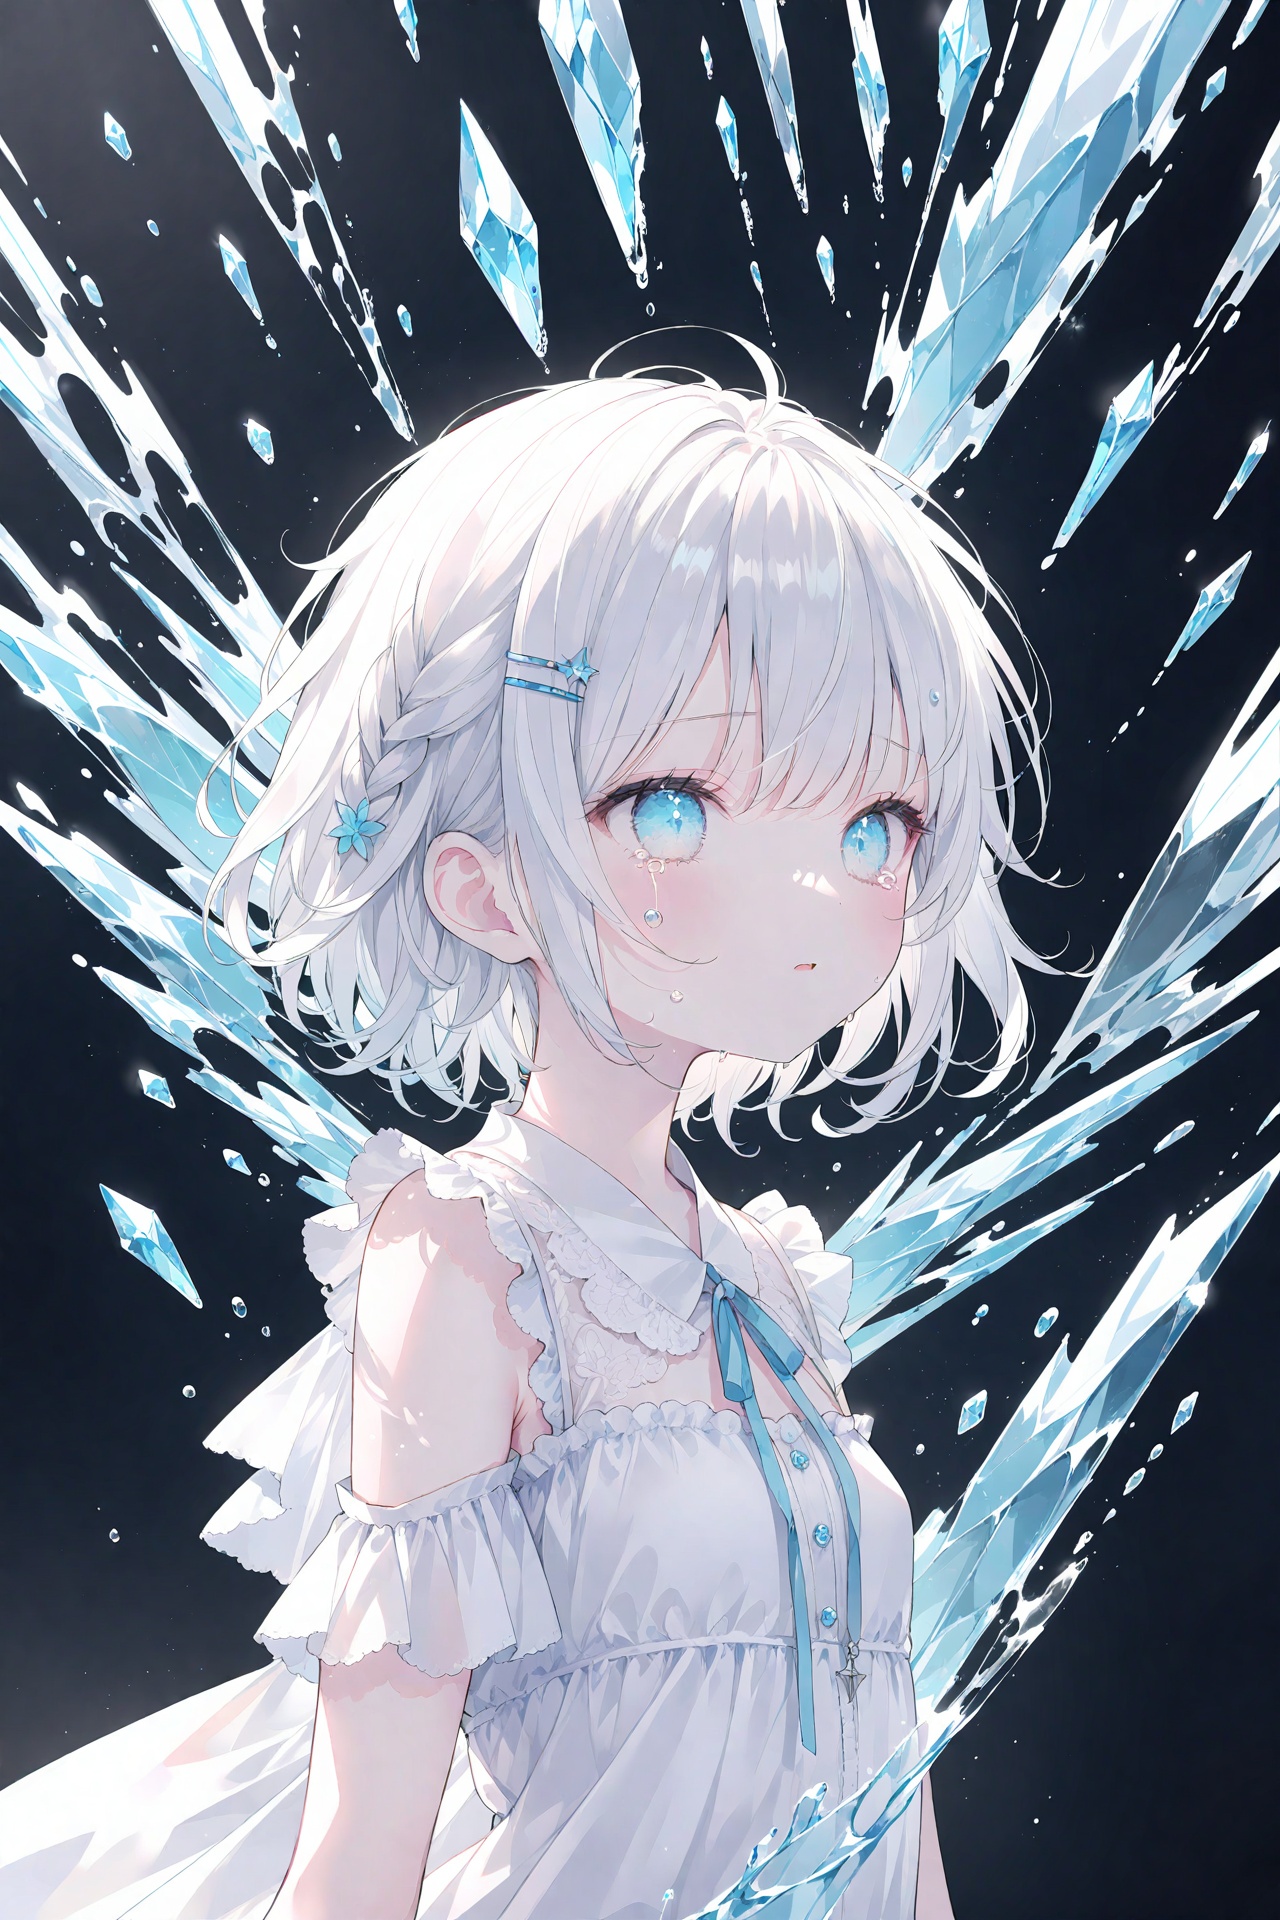 masterpiece,best quality,high quality,(colorful),Artist onineko,1girl,loli,White Dress,White short hair,braids,lily flower hair clip,upper body,cry,water,black background,Ice crystal,dappled sunlight,Suspended colorless crystal,beautiful detailed glow,(detailed ice),beautiful detailed water,